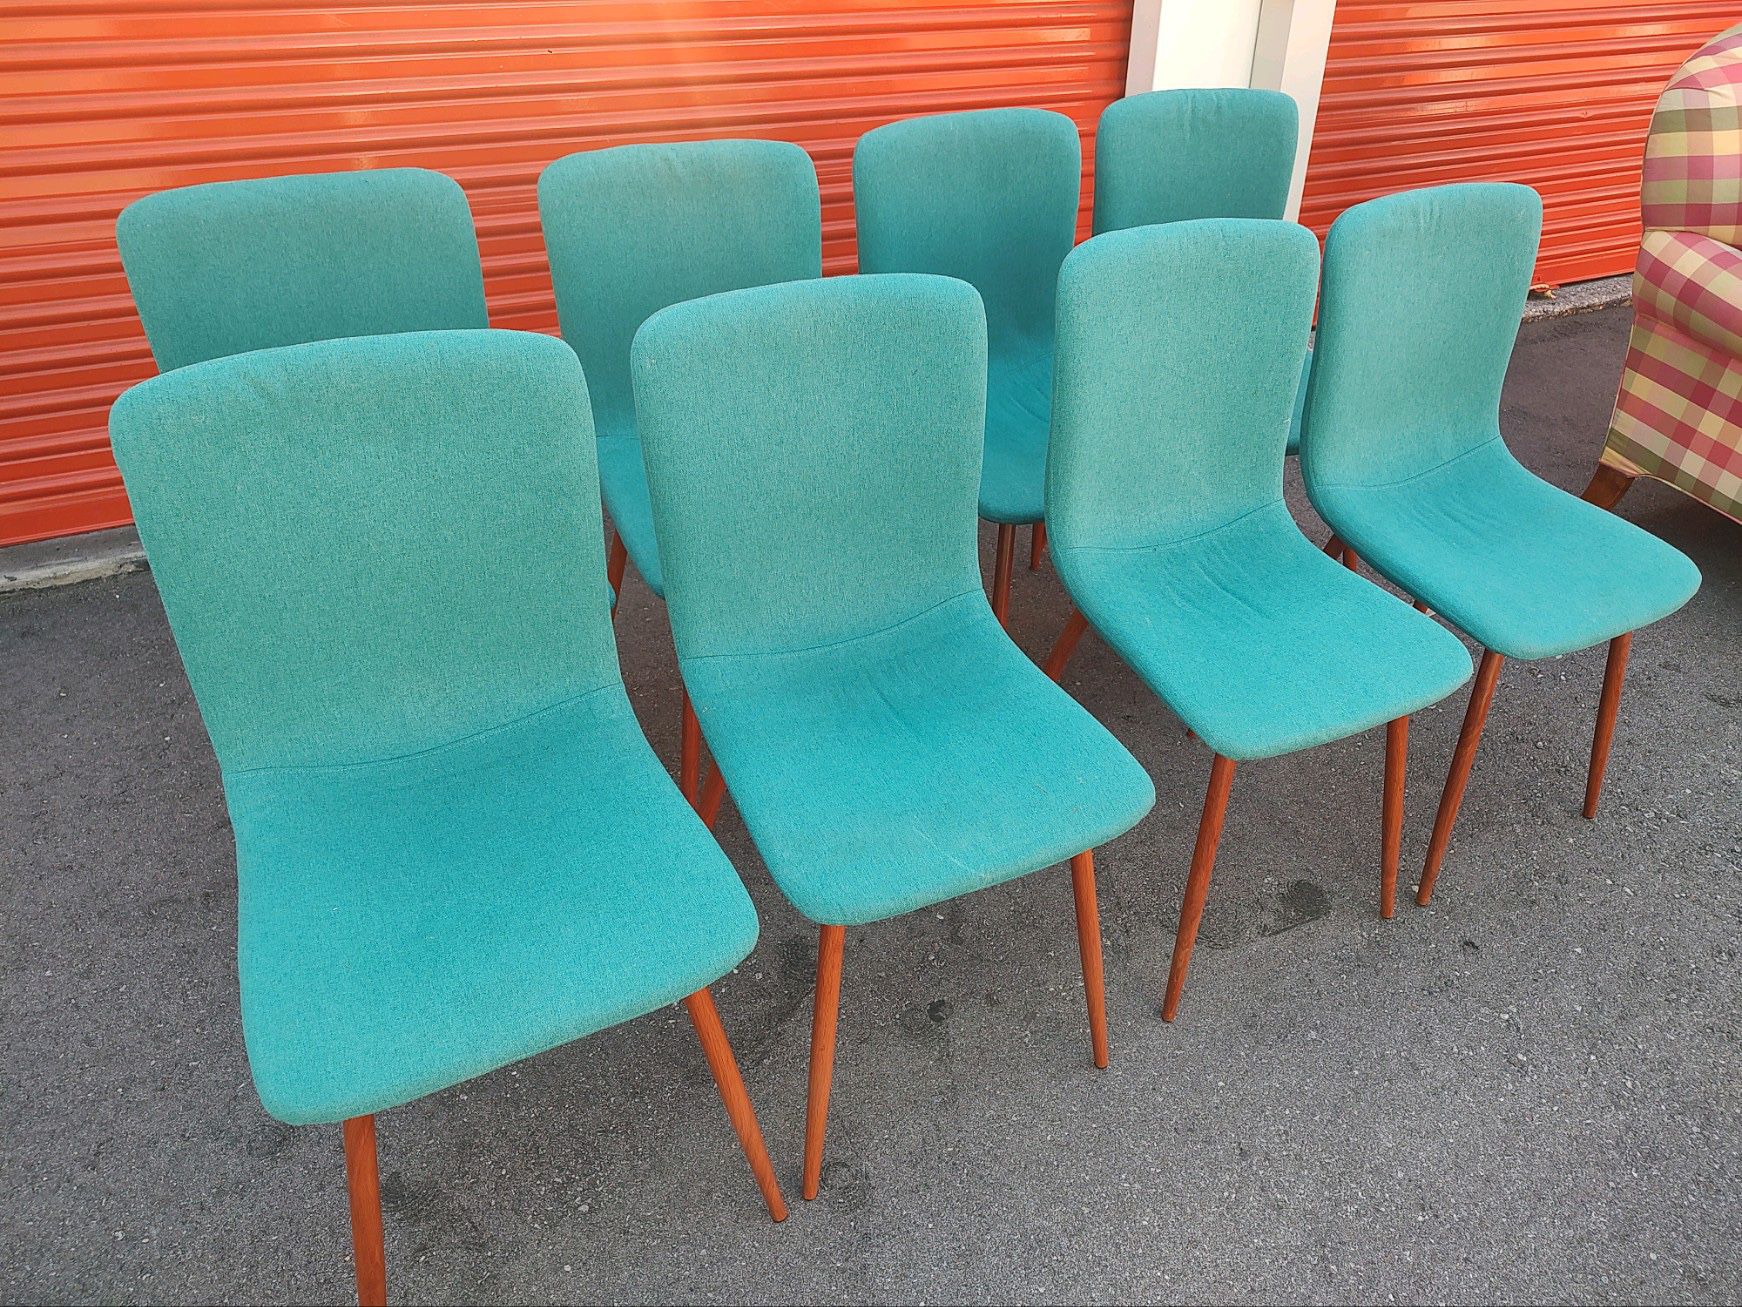 IKEA Teal Fabric Wooden Dining Chairs 